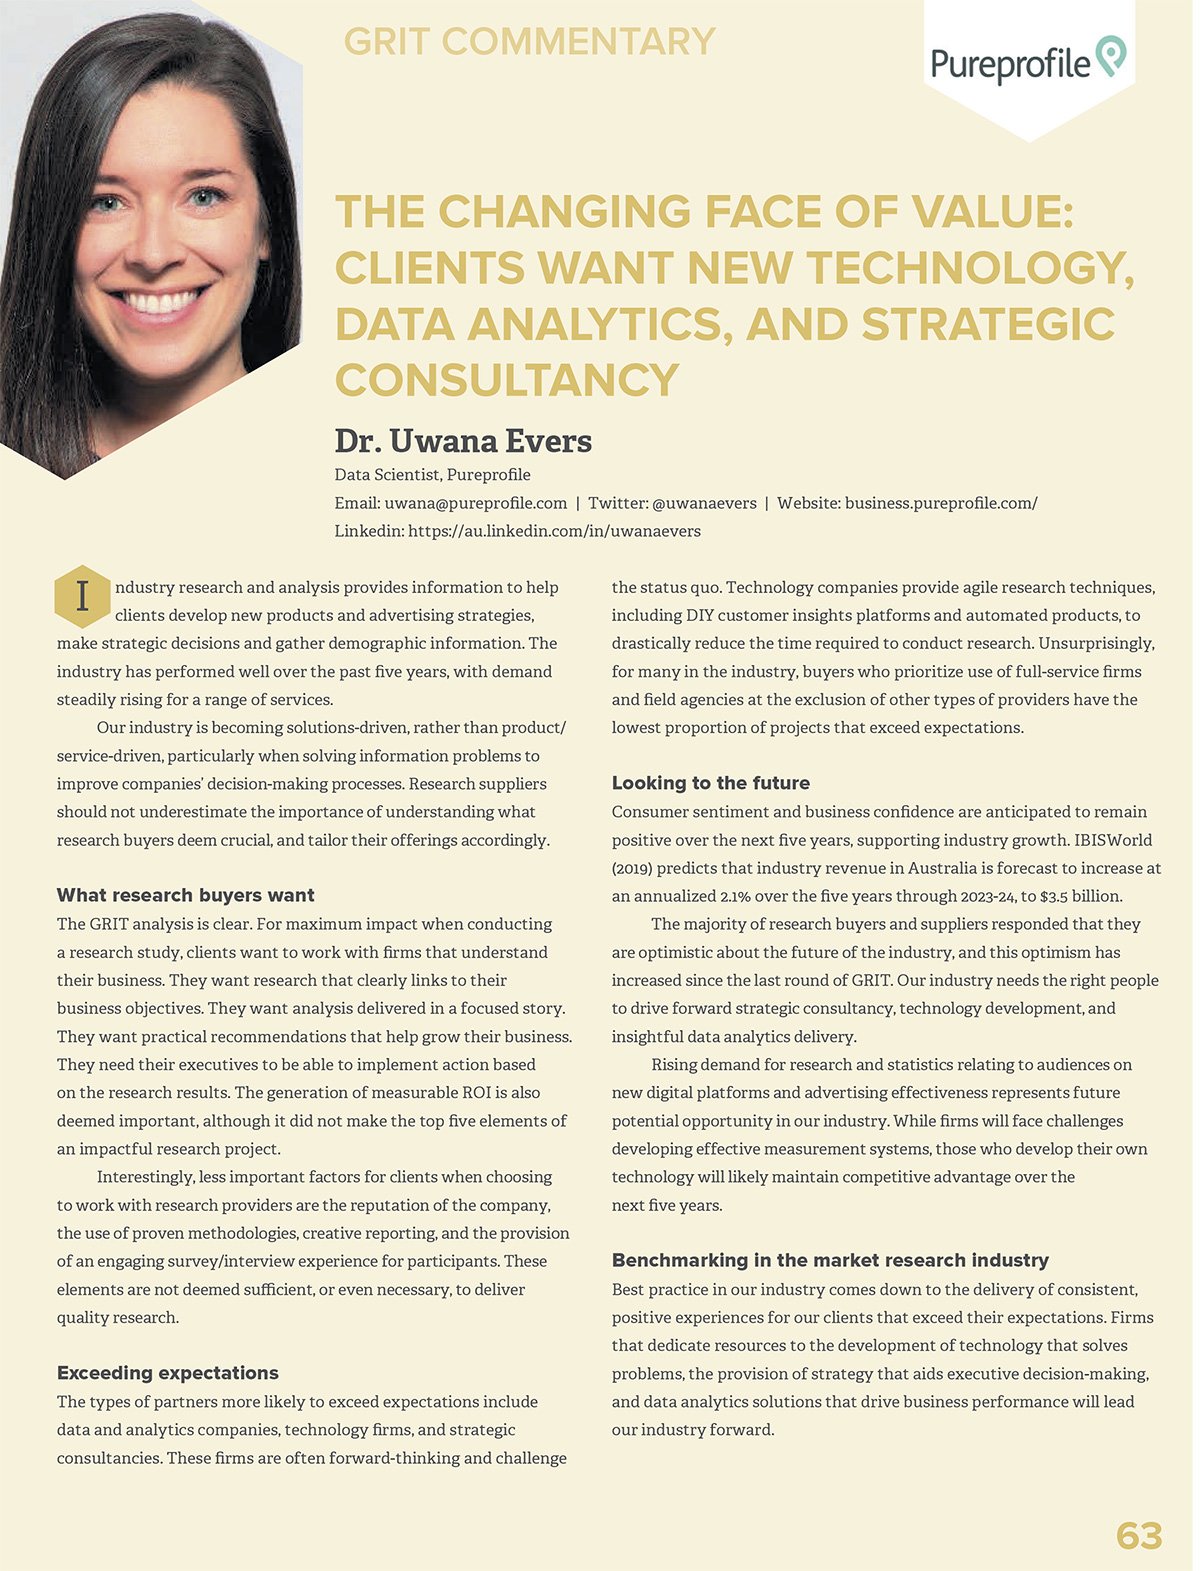 The changing face of value: Clients want new technology, data analytics, and strategic consultancy